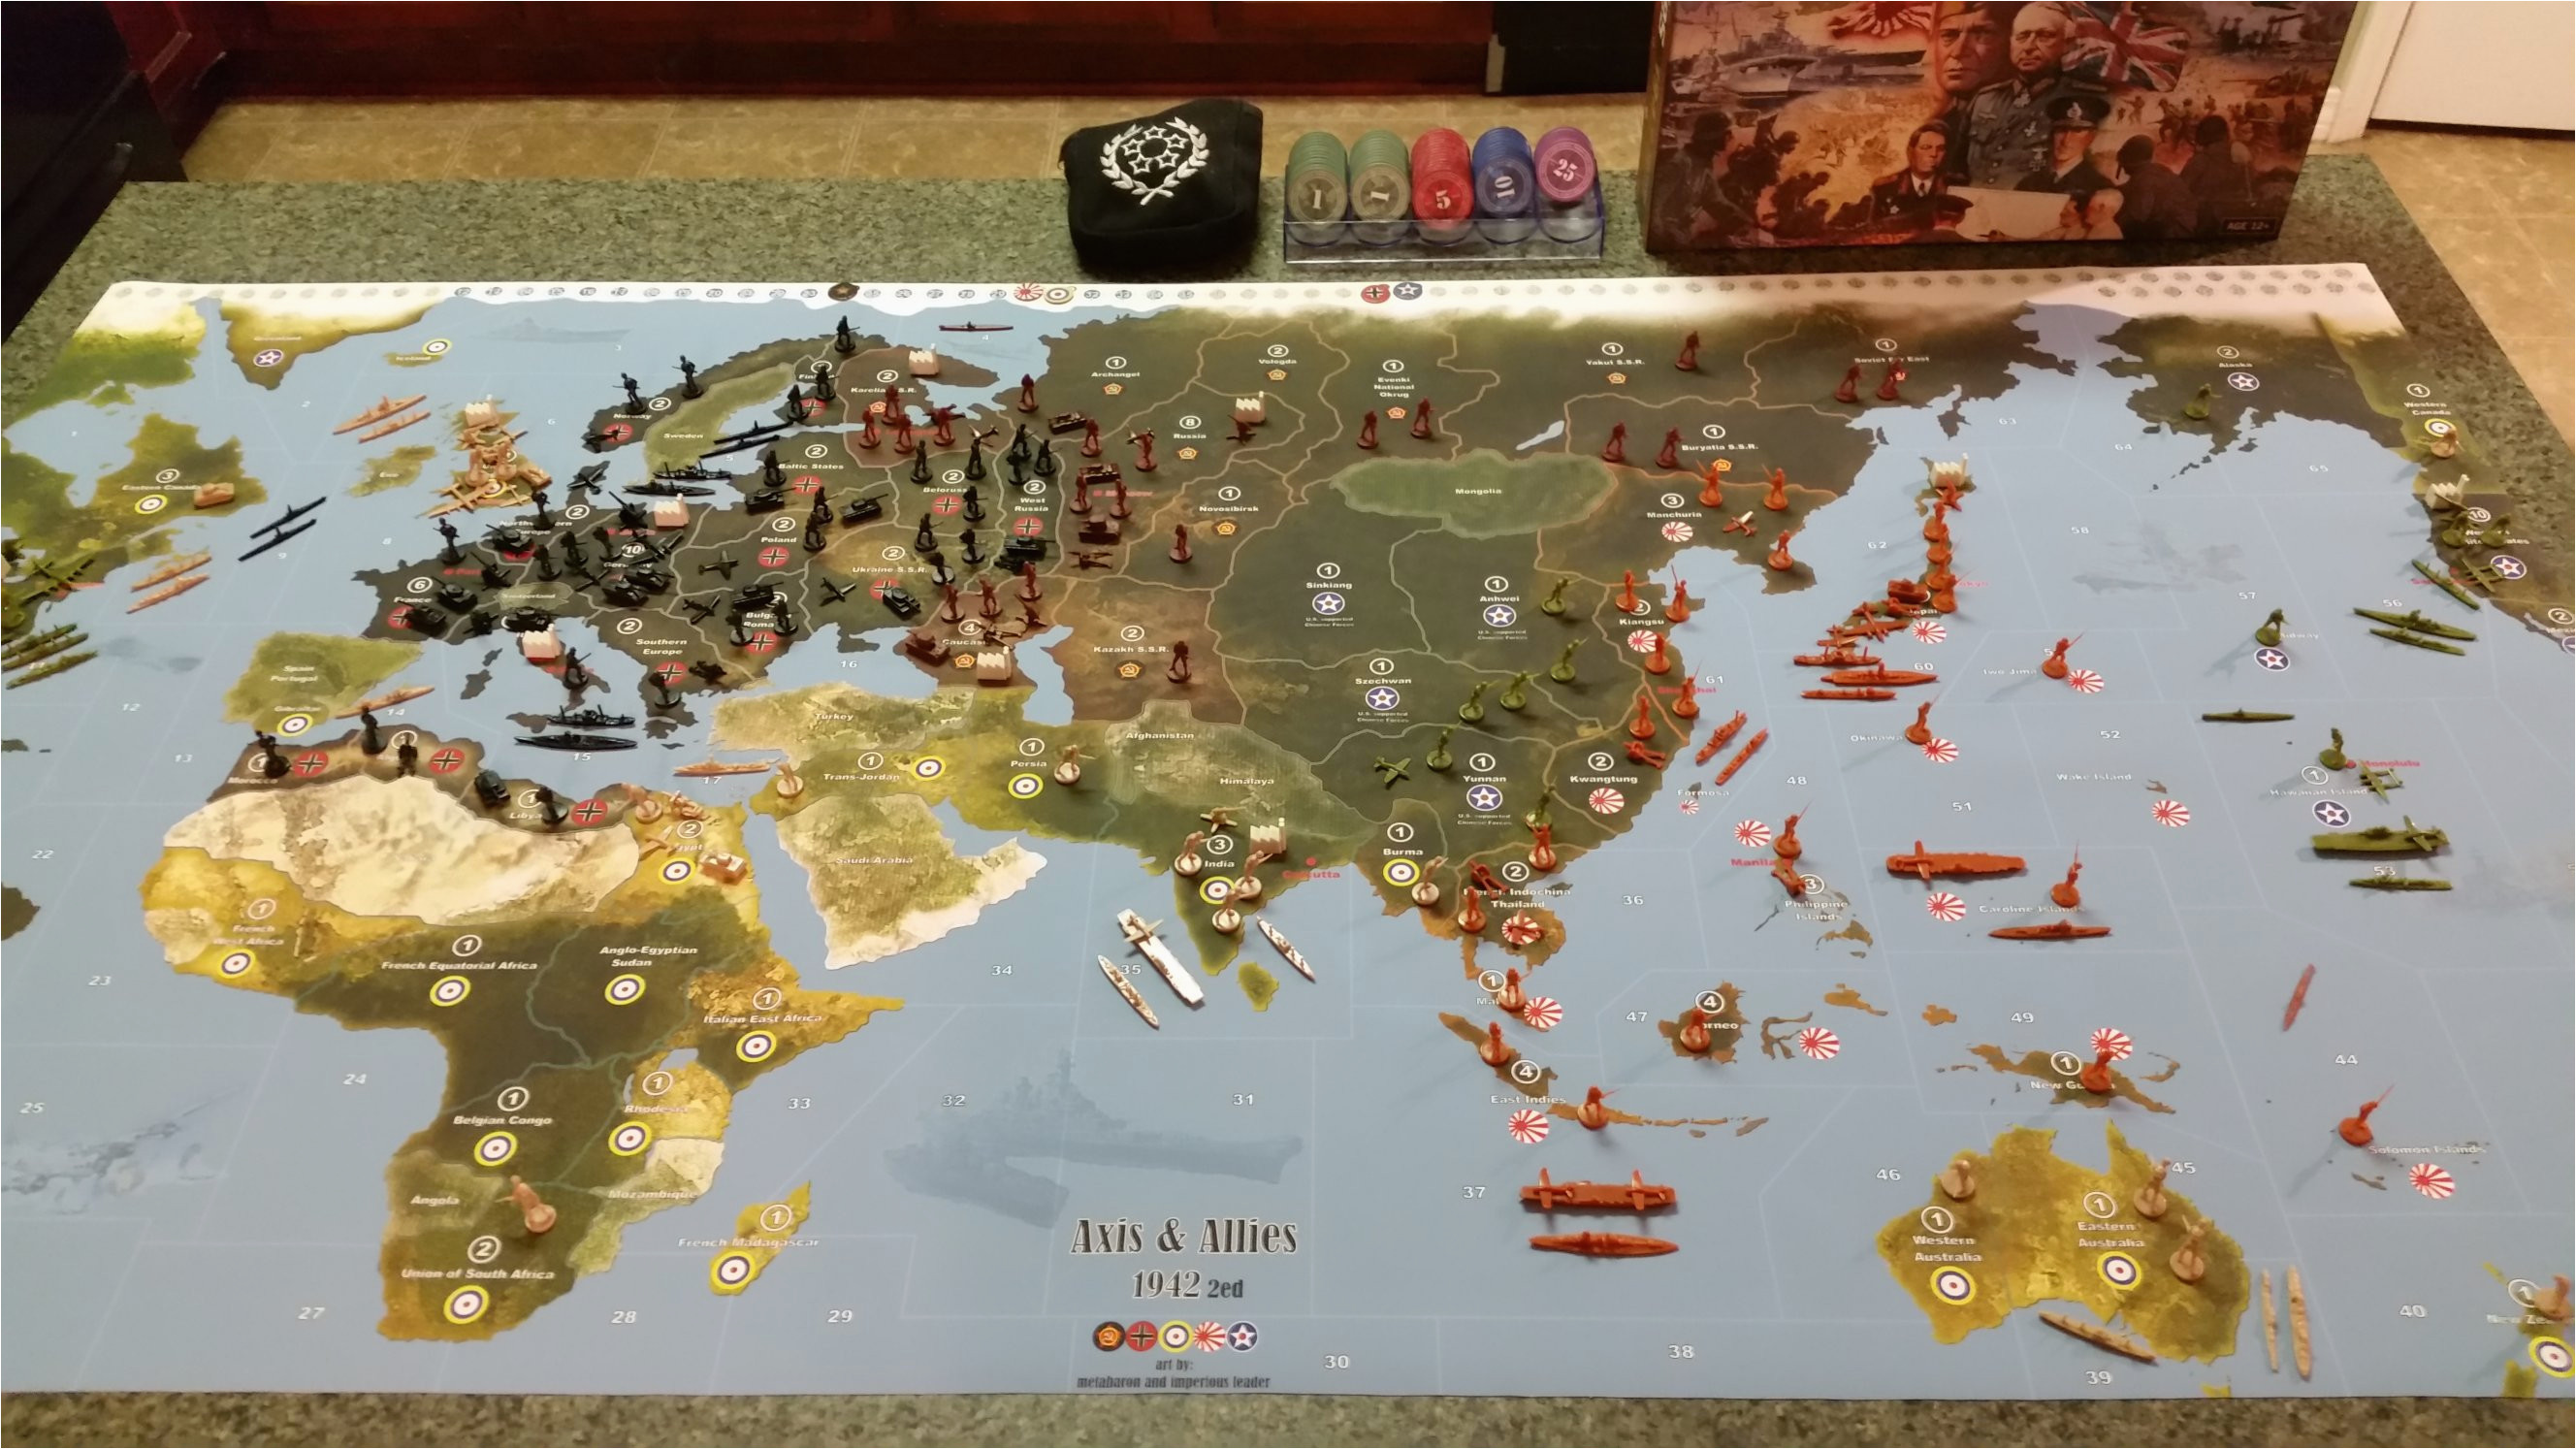 1940 global custom map files axis allies org forums